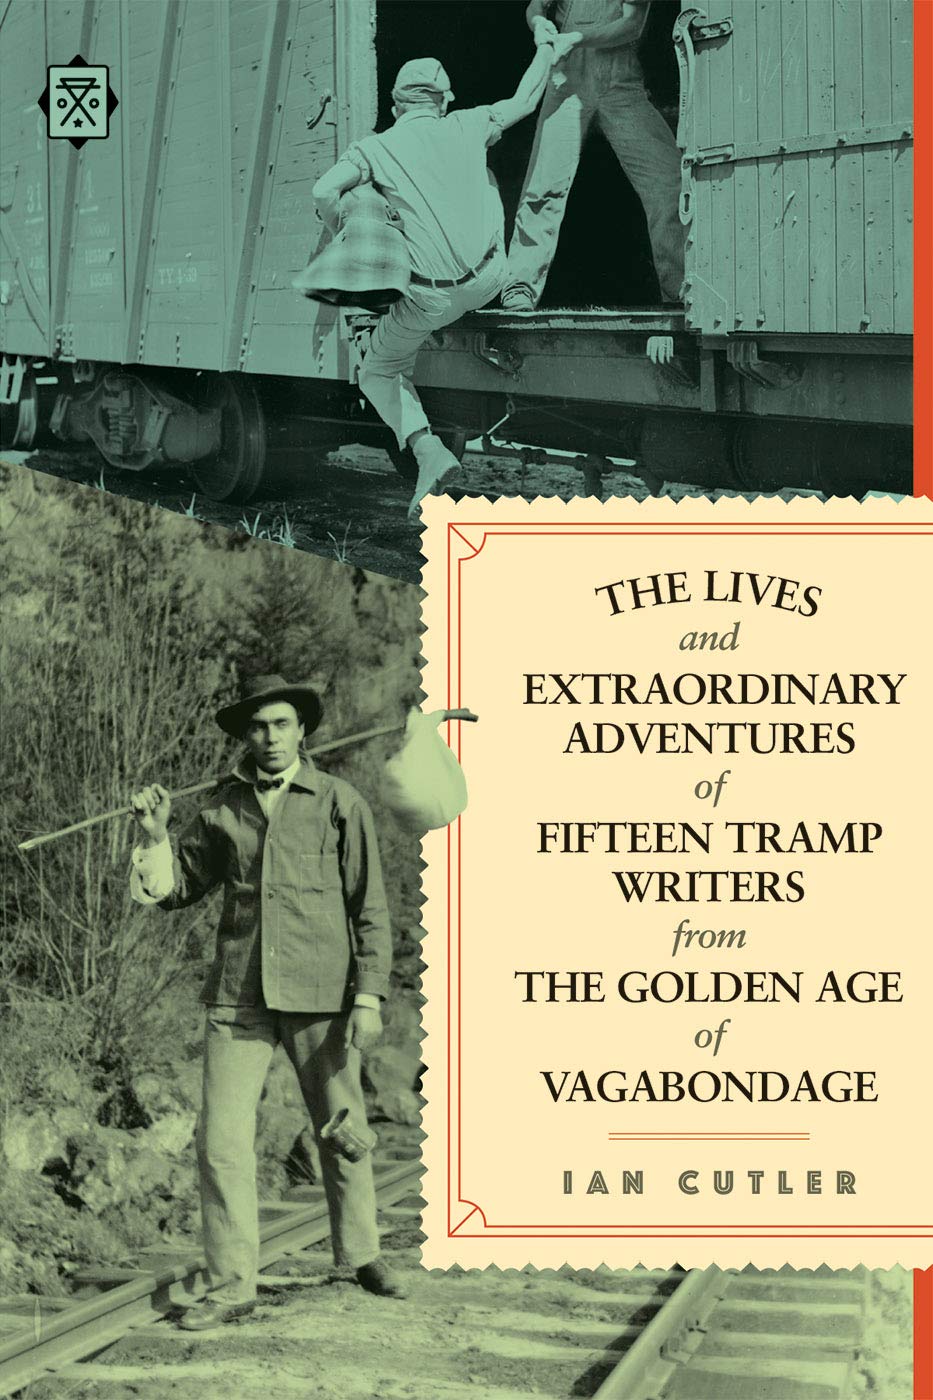 Lives and Extraordinary Adventures of Fifteen Tramp Writers from the Golden Age of Vagabondage - Third Eye